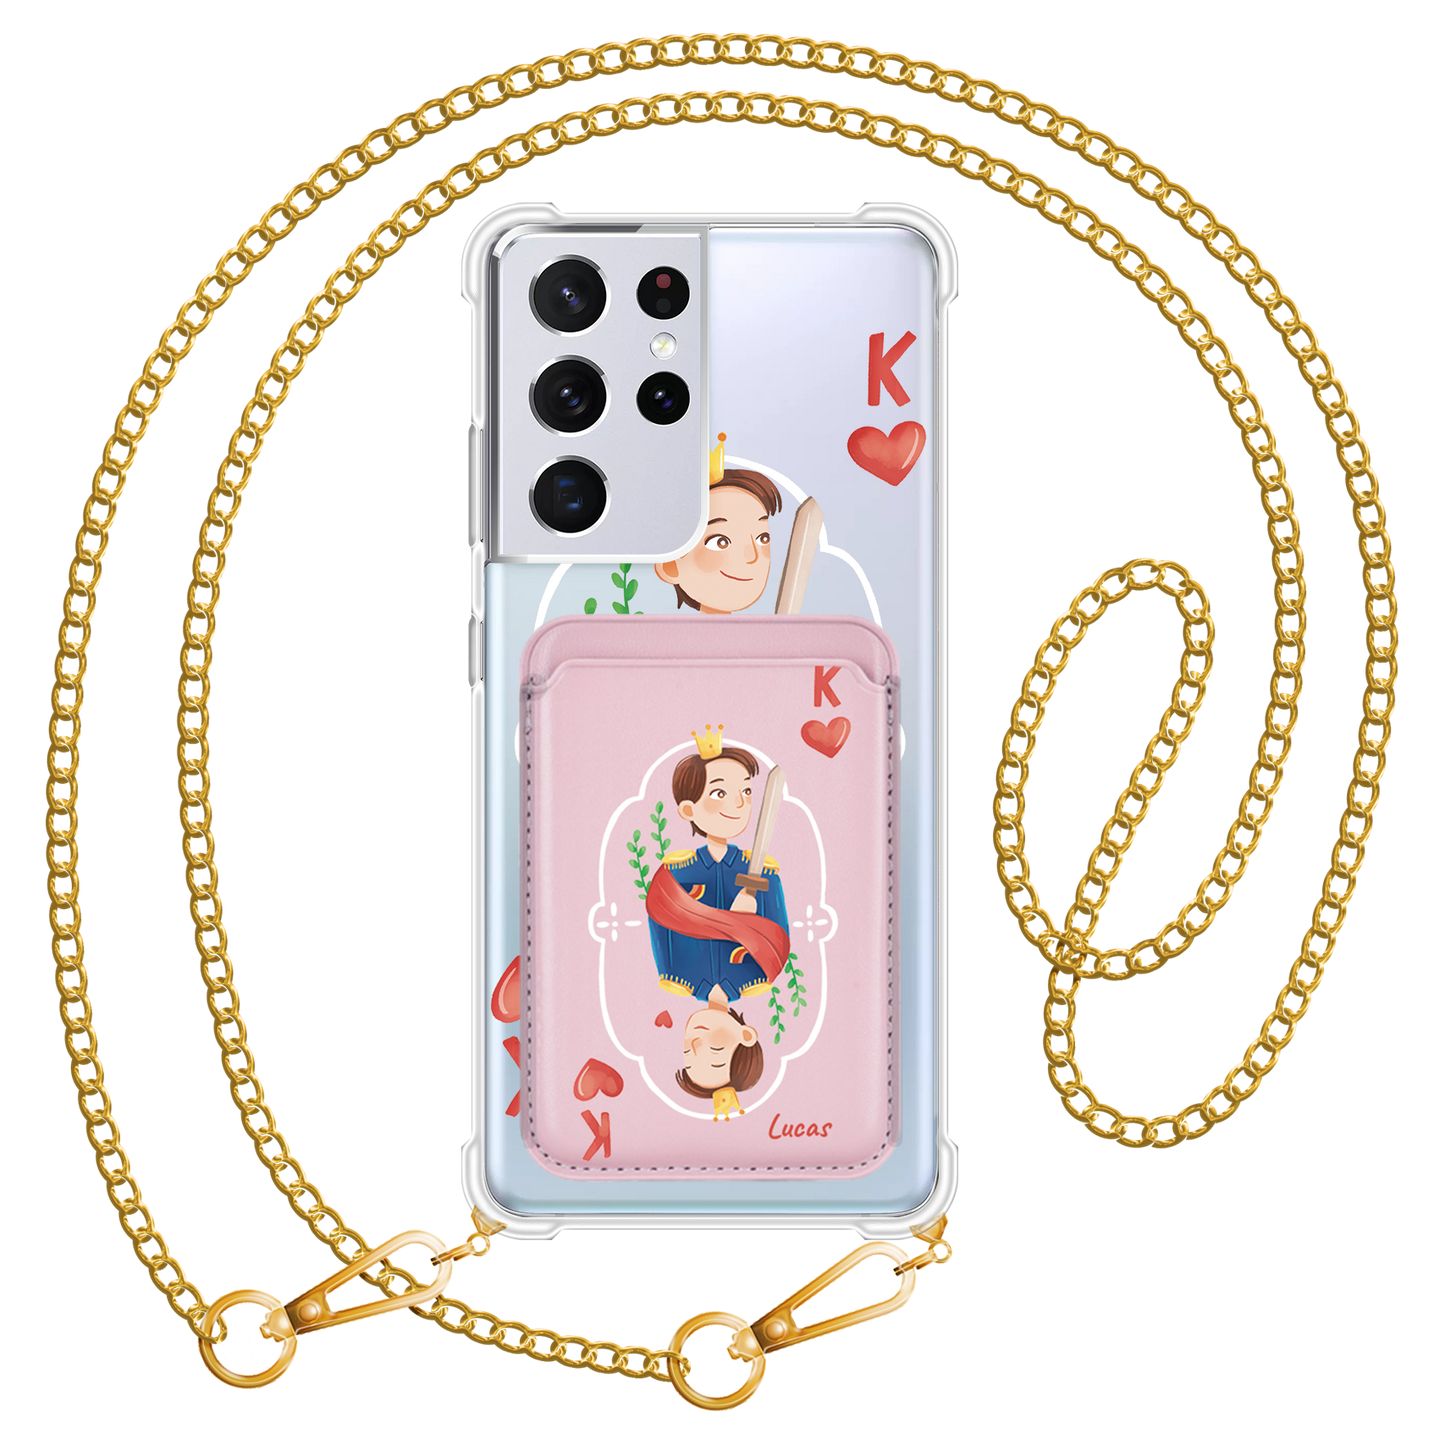 Android Magnetic Wallet Case - King (Couple Case)